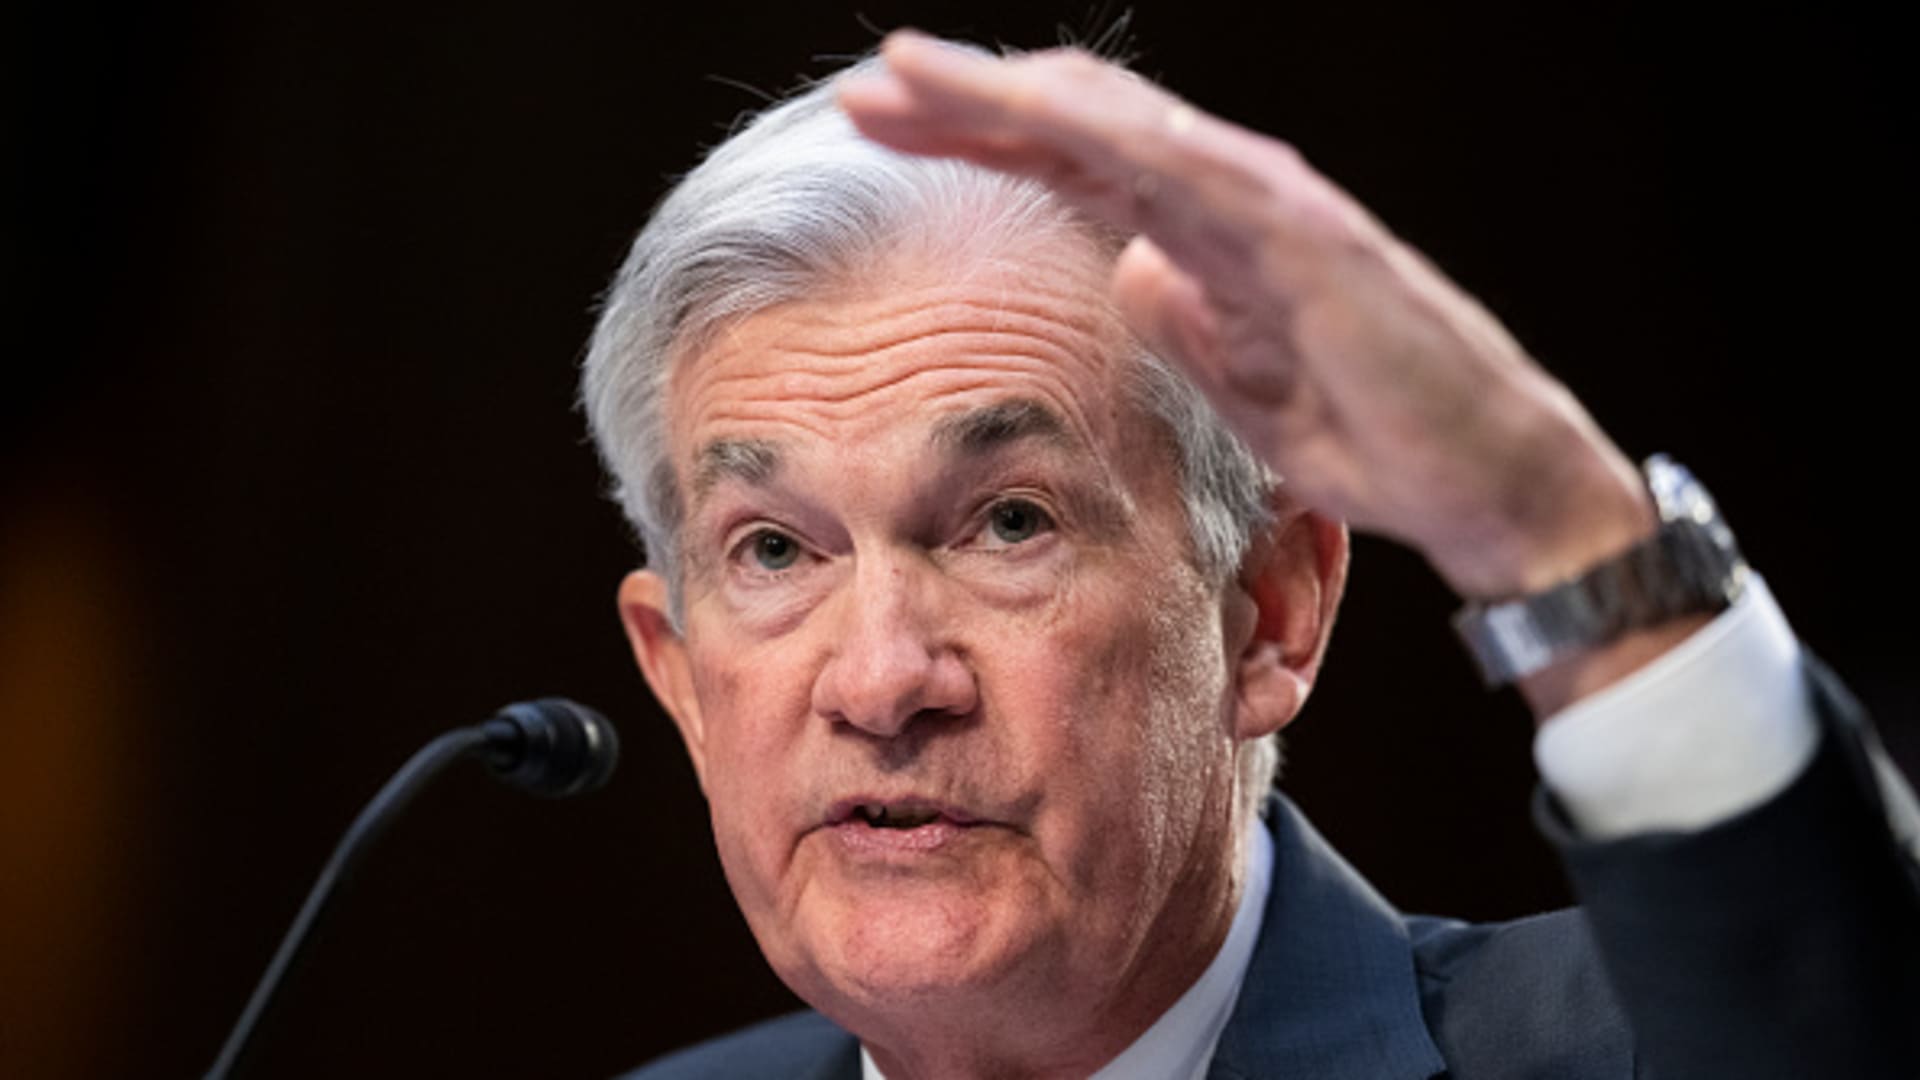 Something broke, but the Fed’s still expected to push rates higher